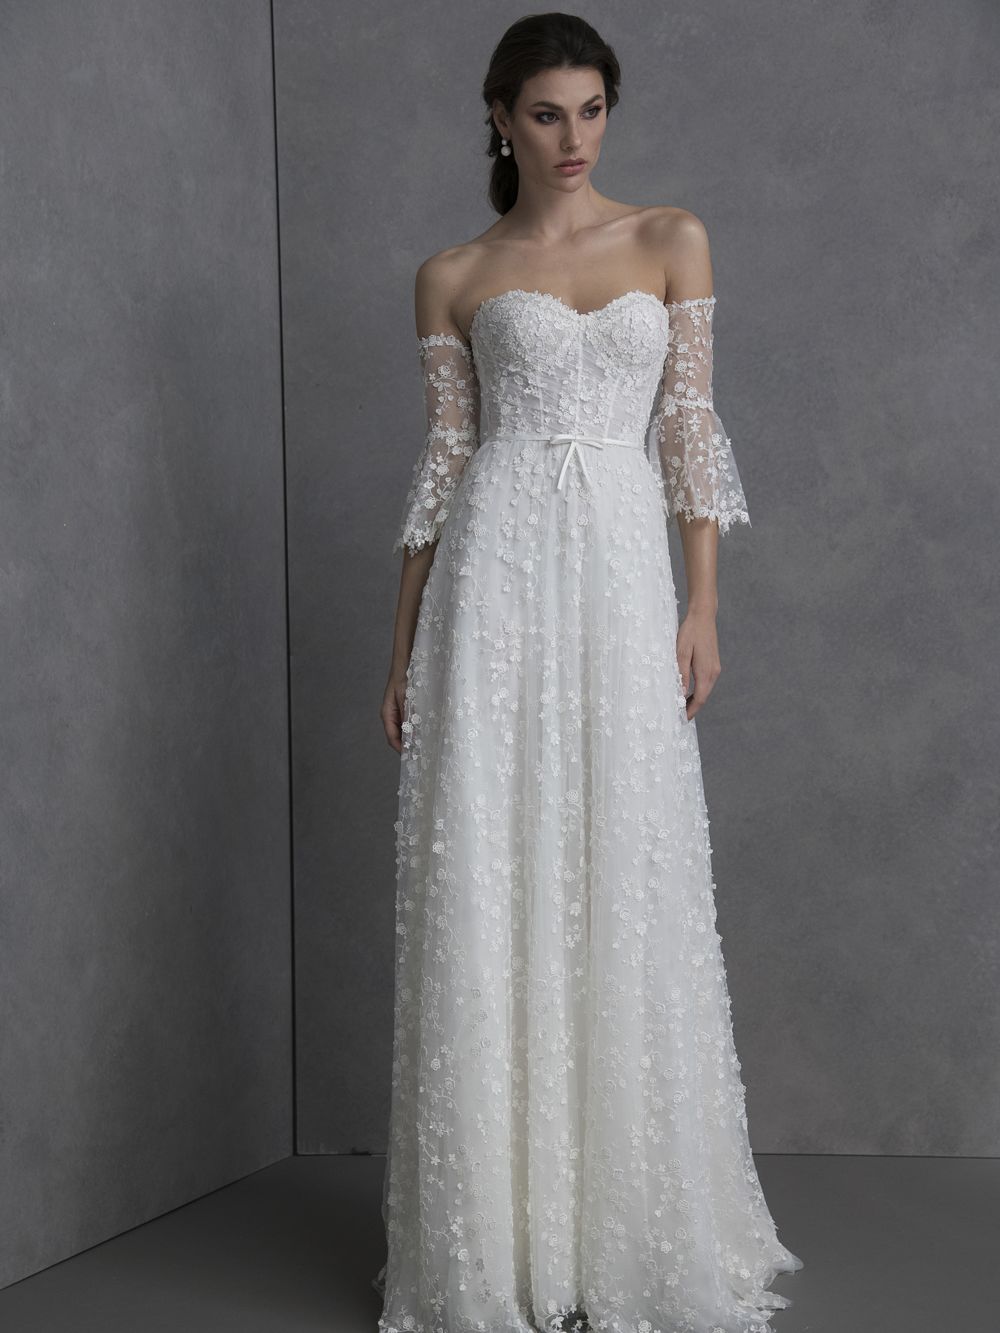 Wedding Gowns by Valentini Spose | Dimitra's Bridal - Chicago, IL